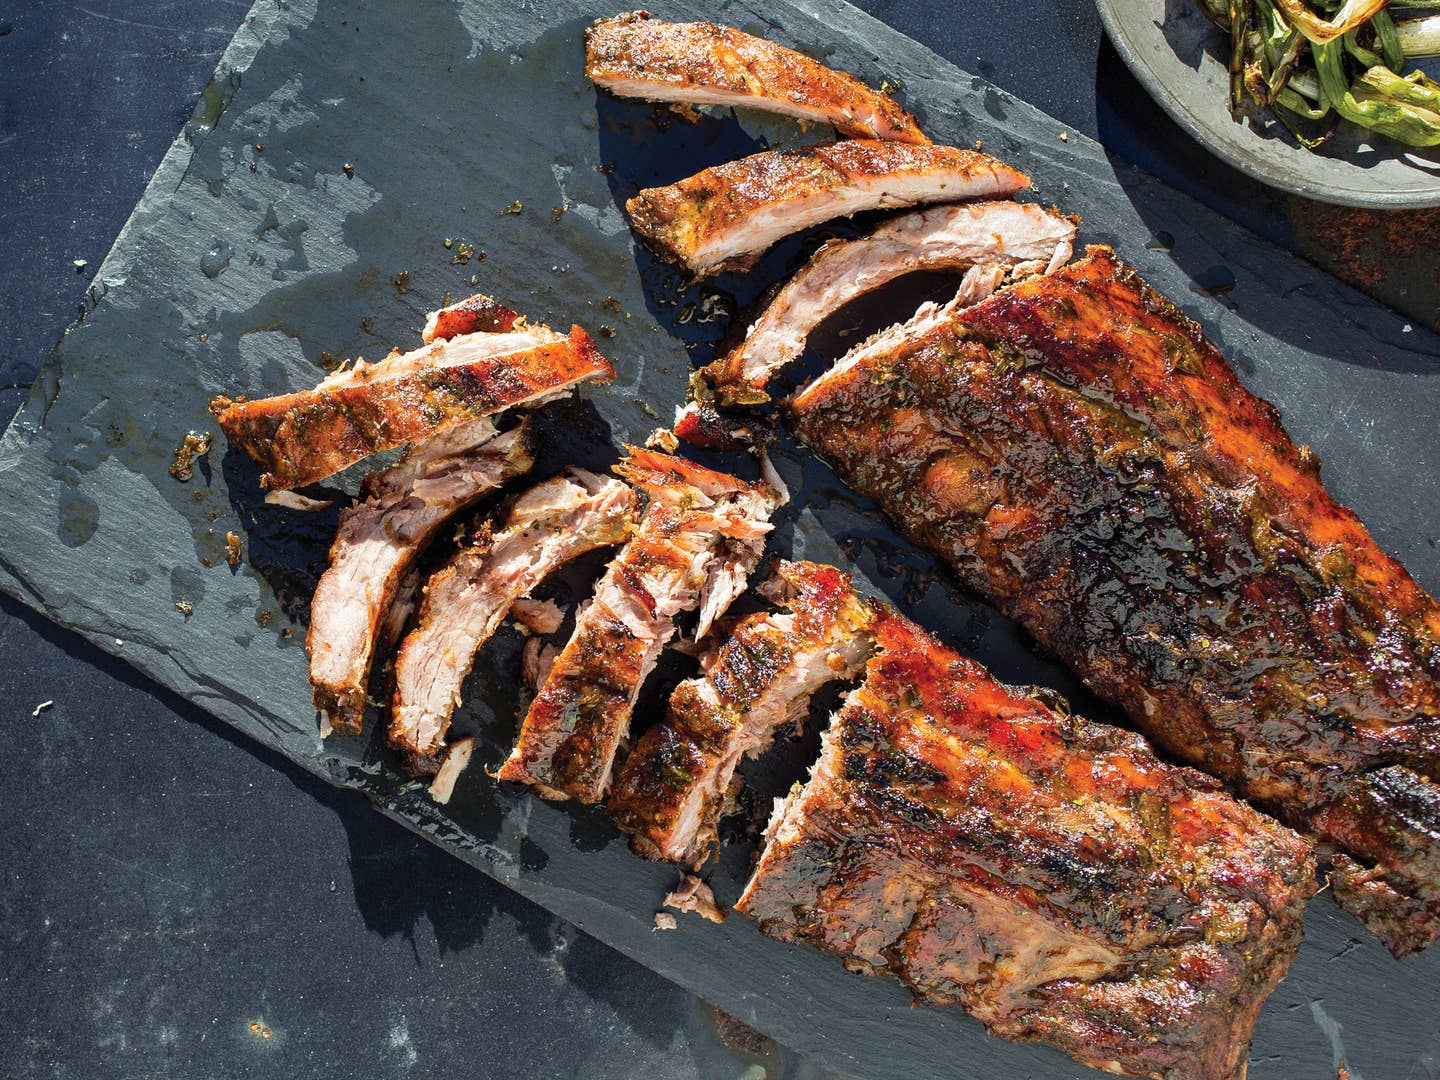 Our Best Rib Recipes Are Tender and Juicy to the Bone